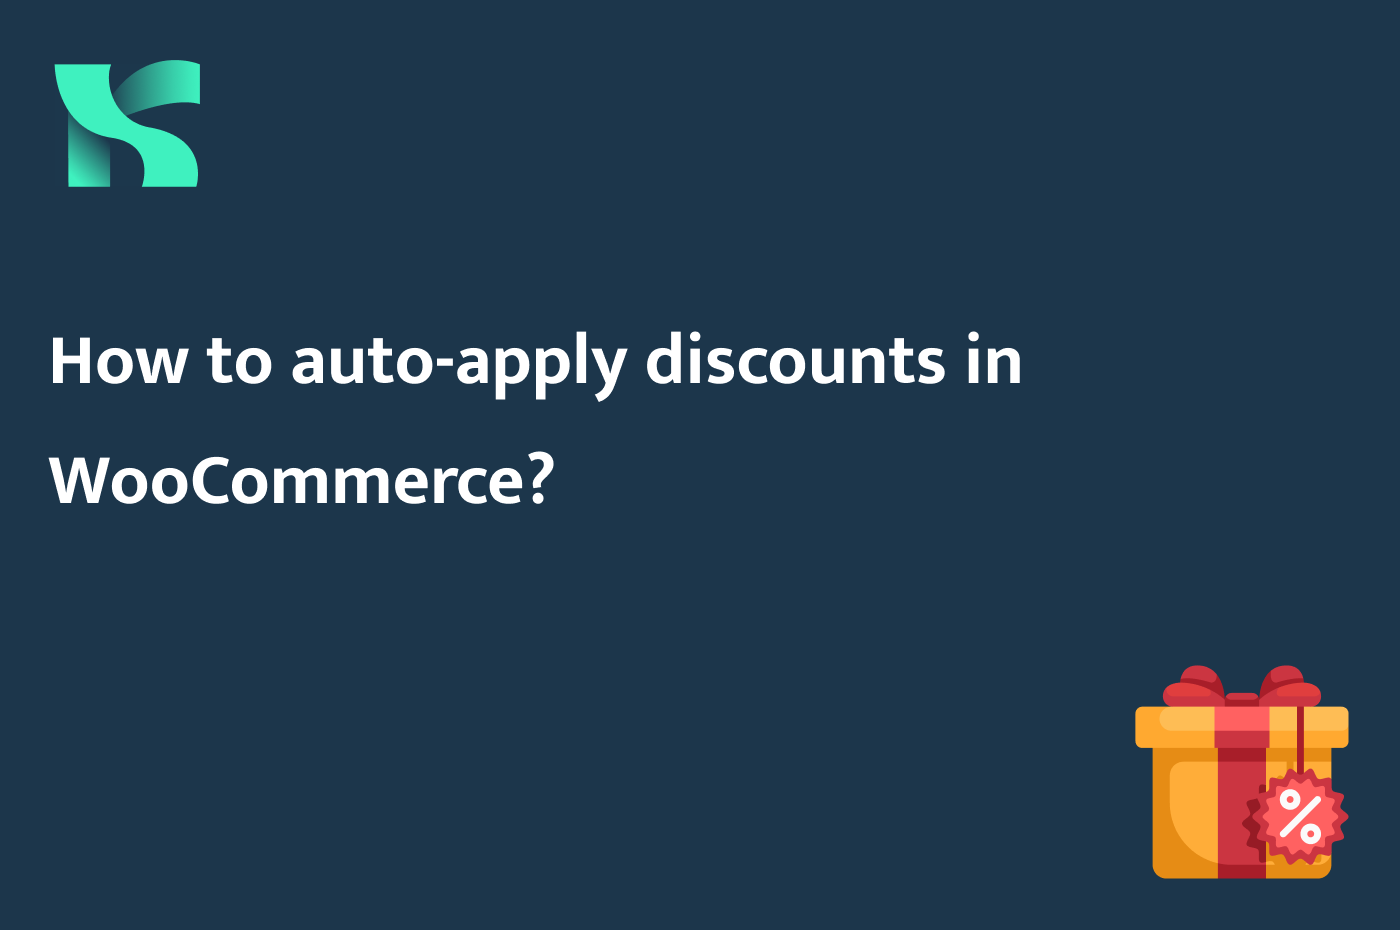 How to auto-apply discounts in WooCommerce?